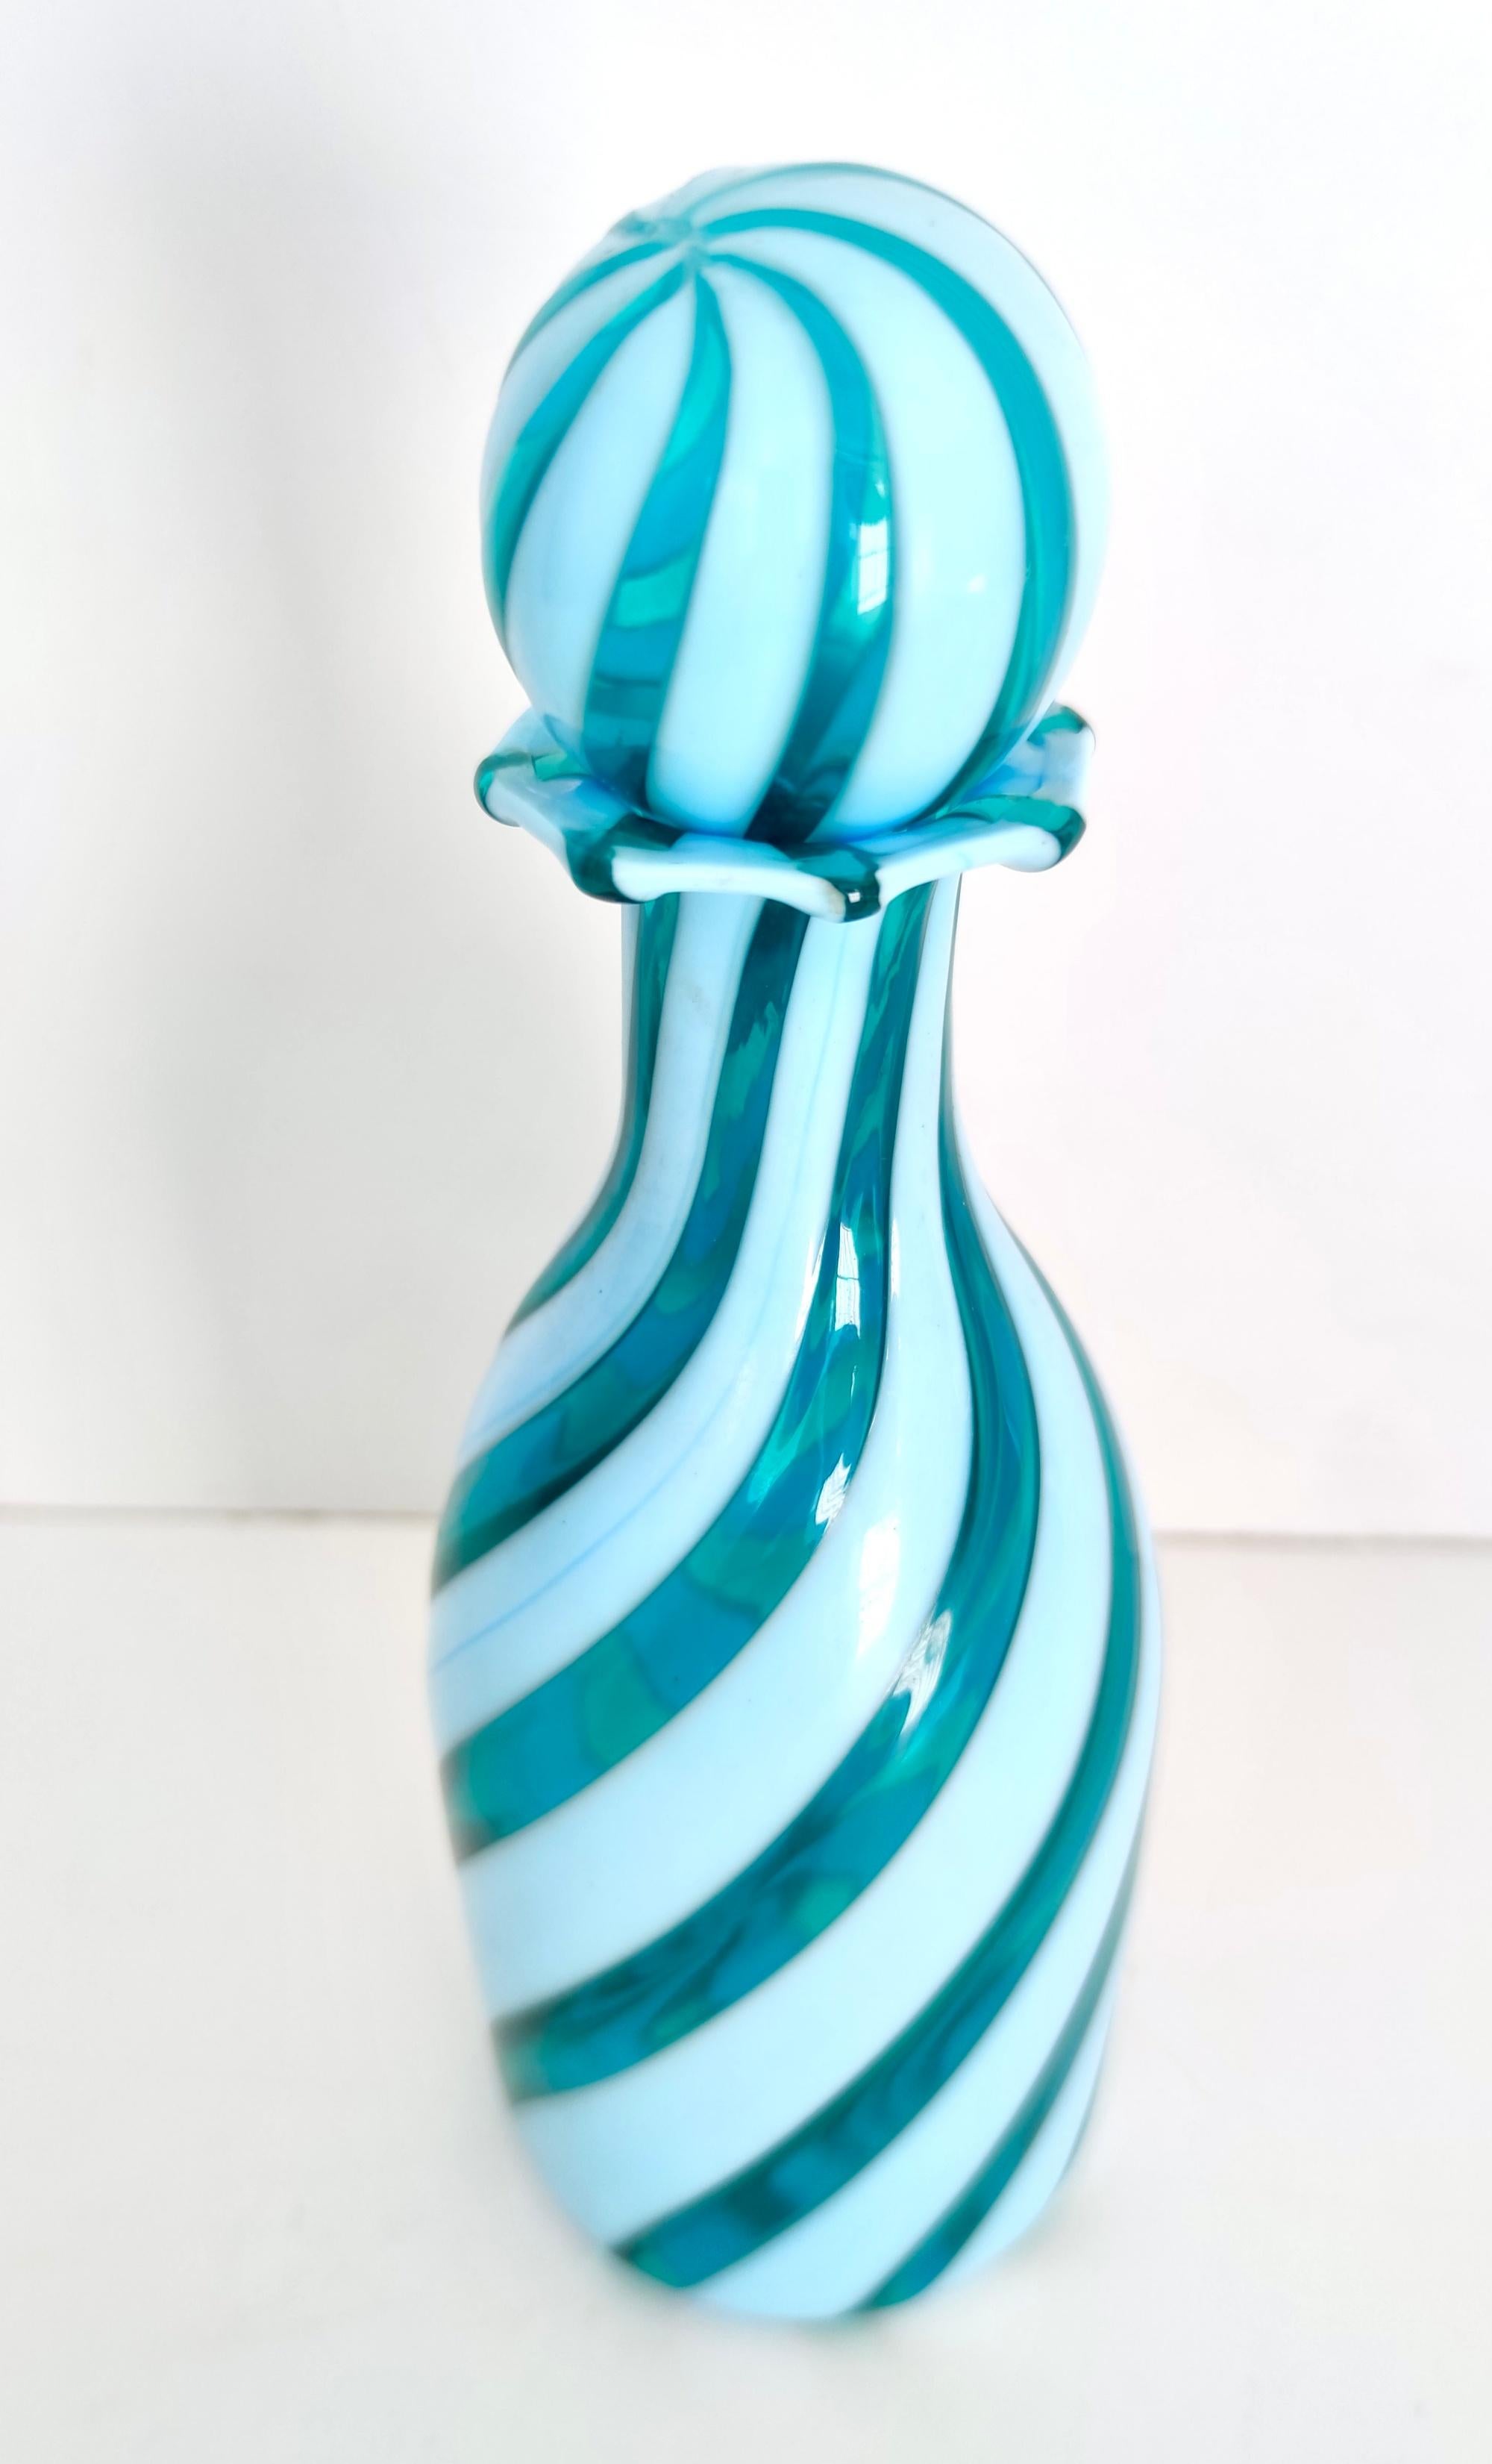 Italian Murano Glass Decanter Ascribable to Toso with Teal and White Canes, Italy